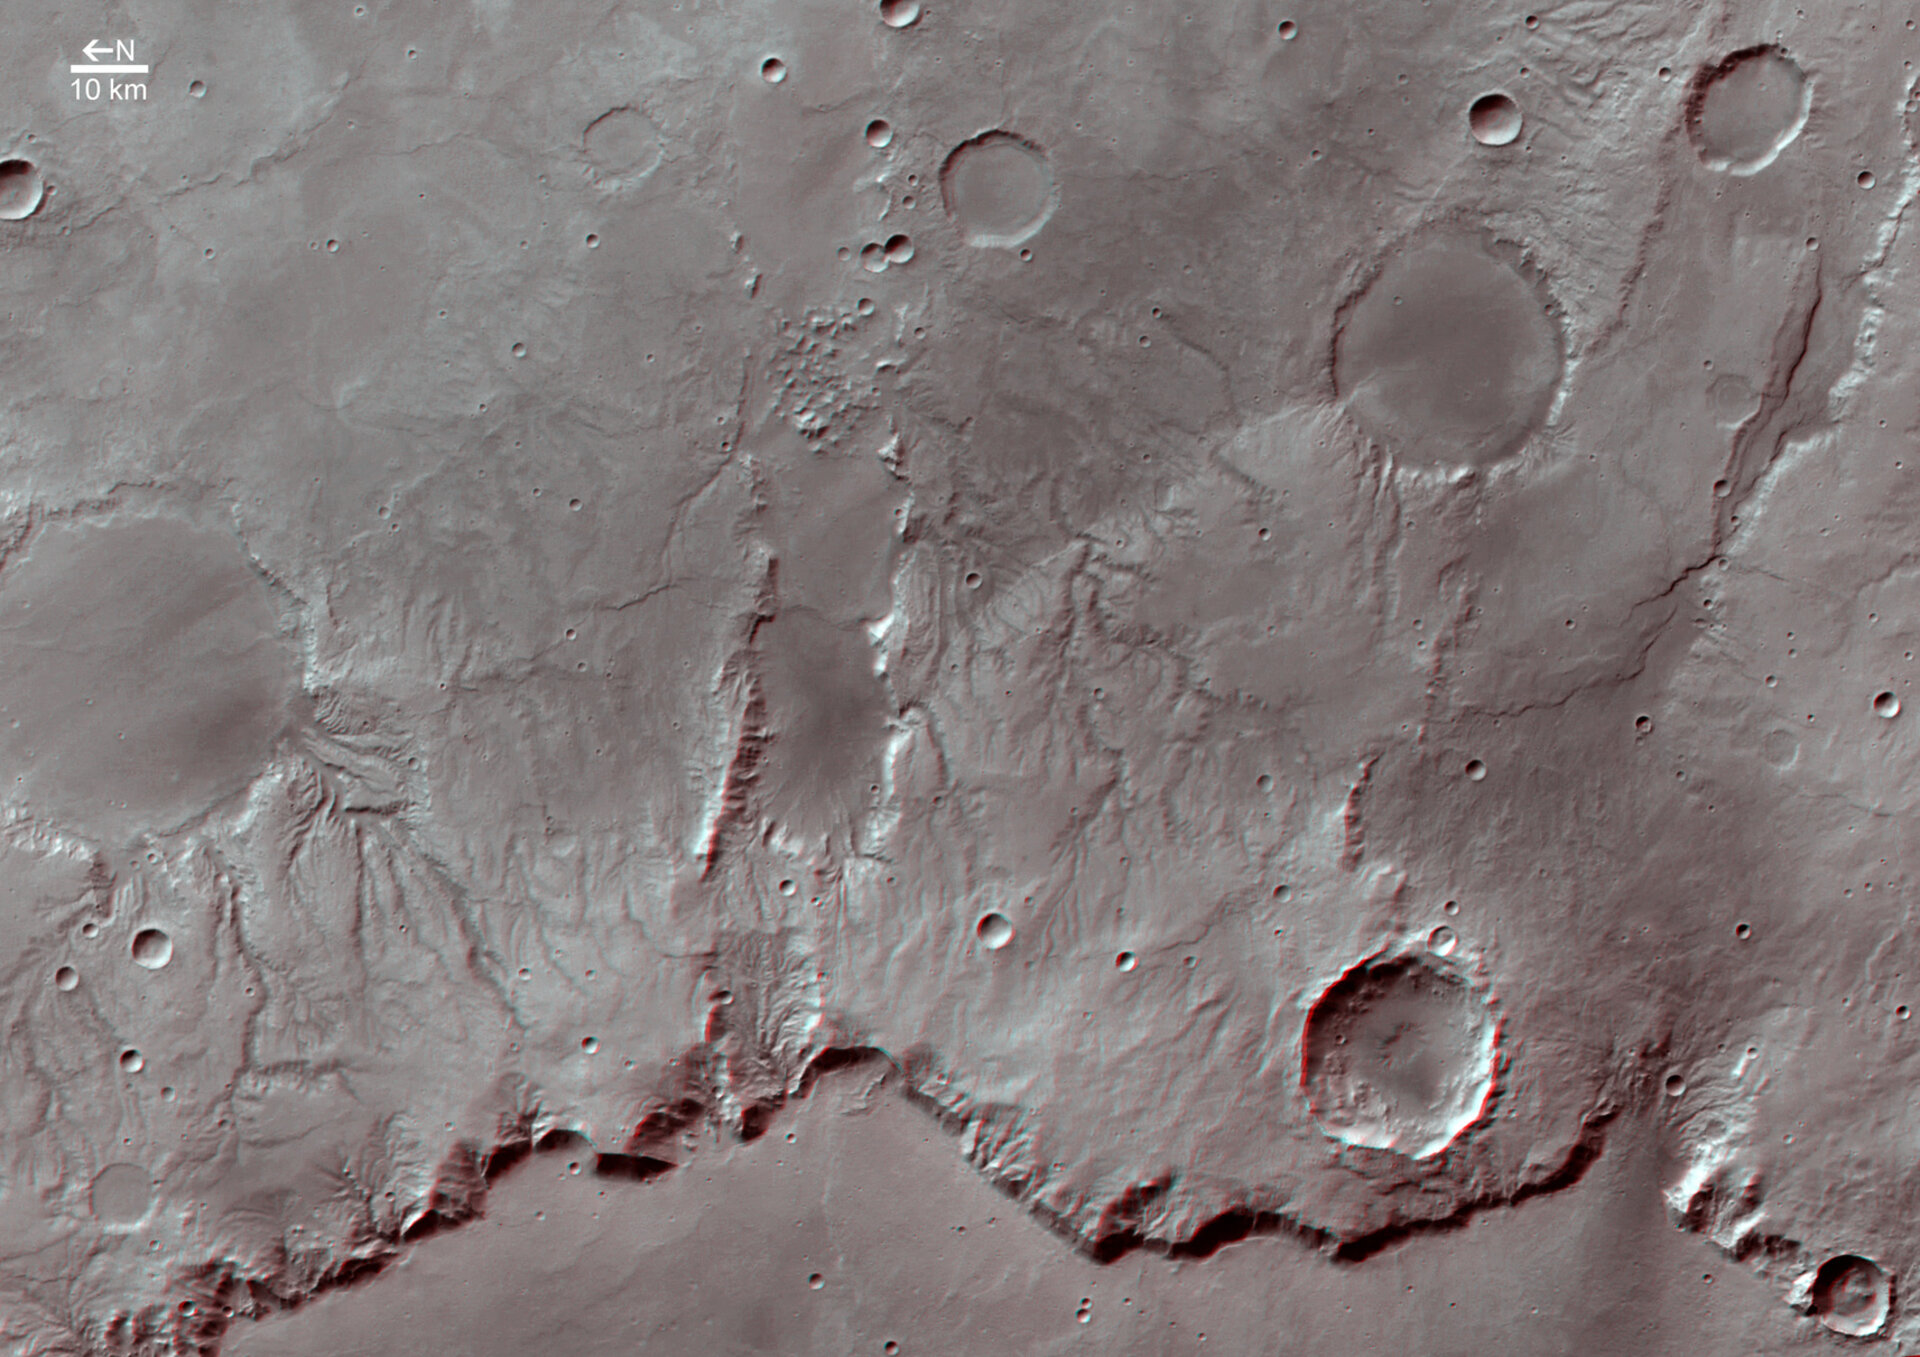 3D image of rim of Crater Huygens